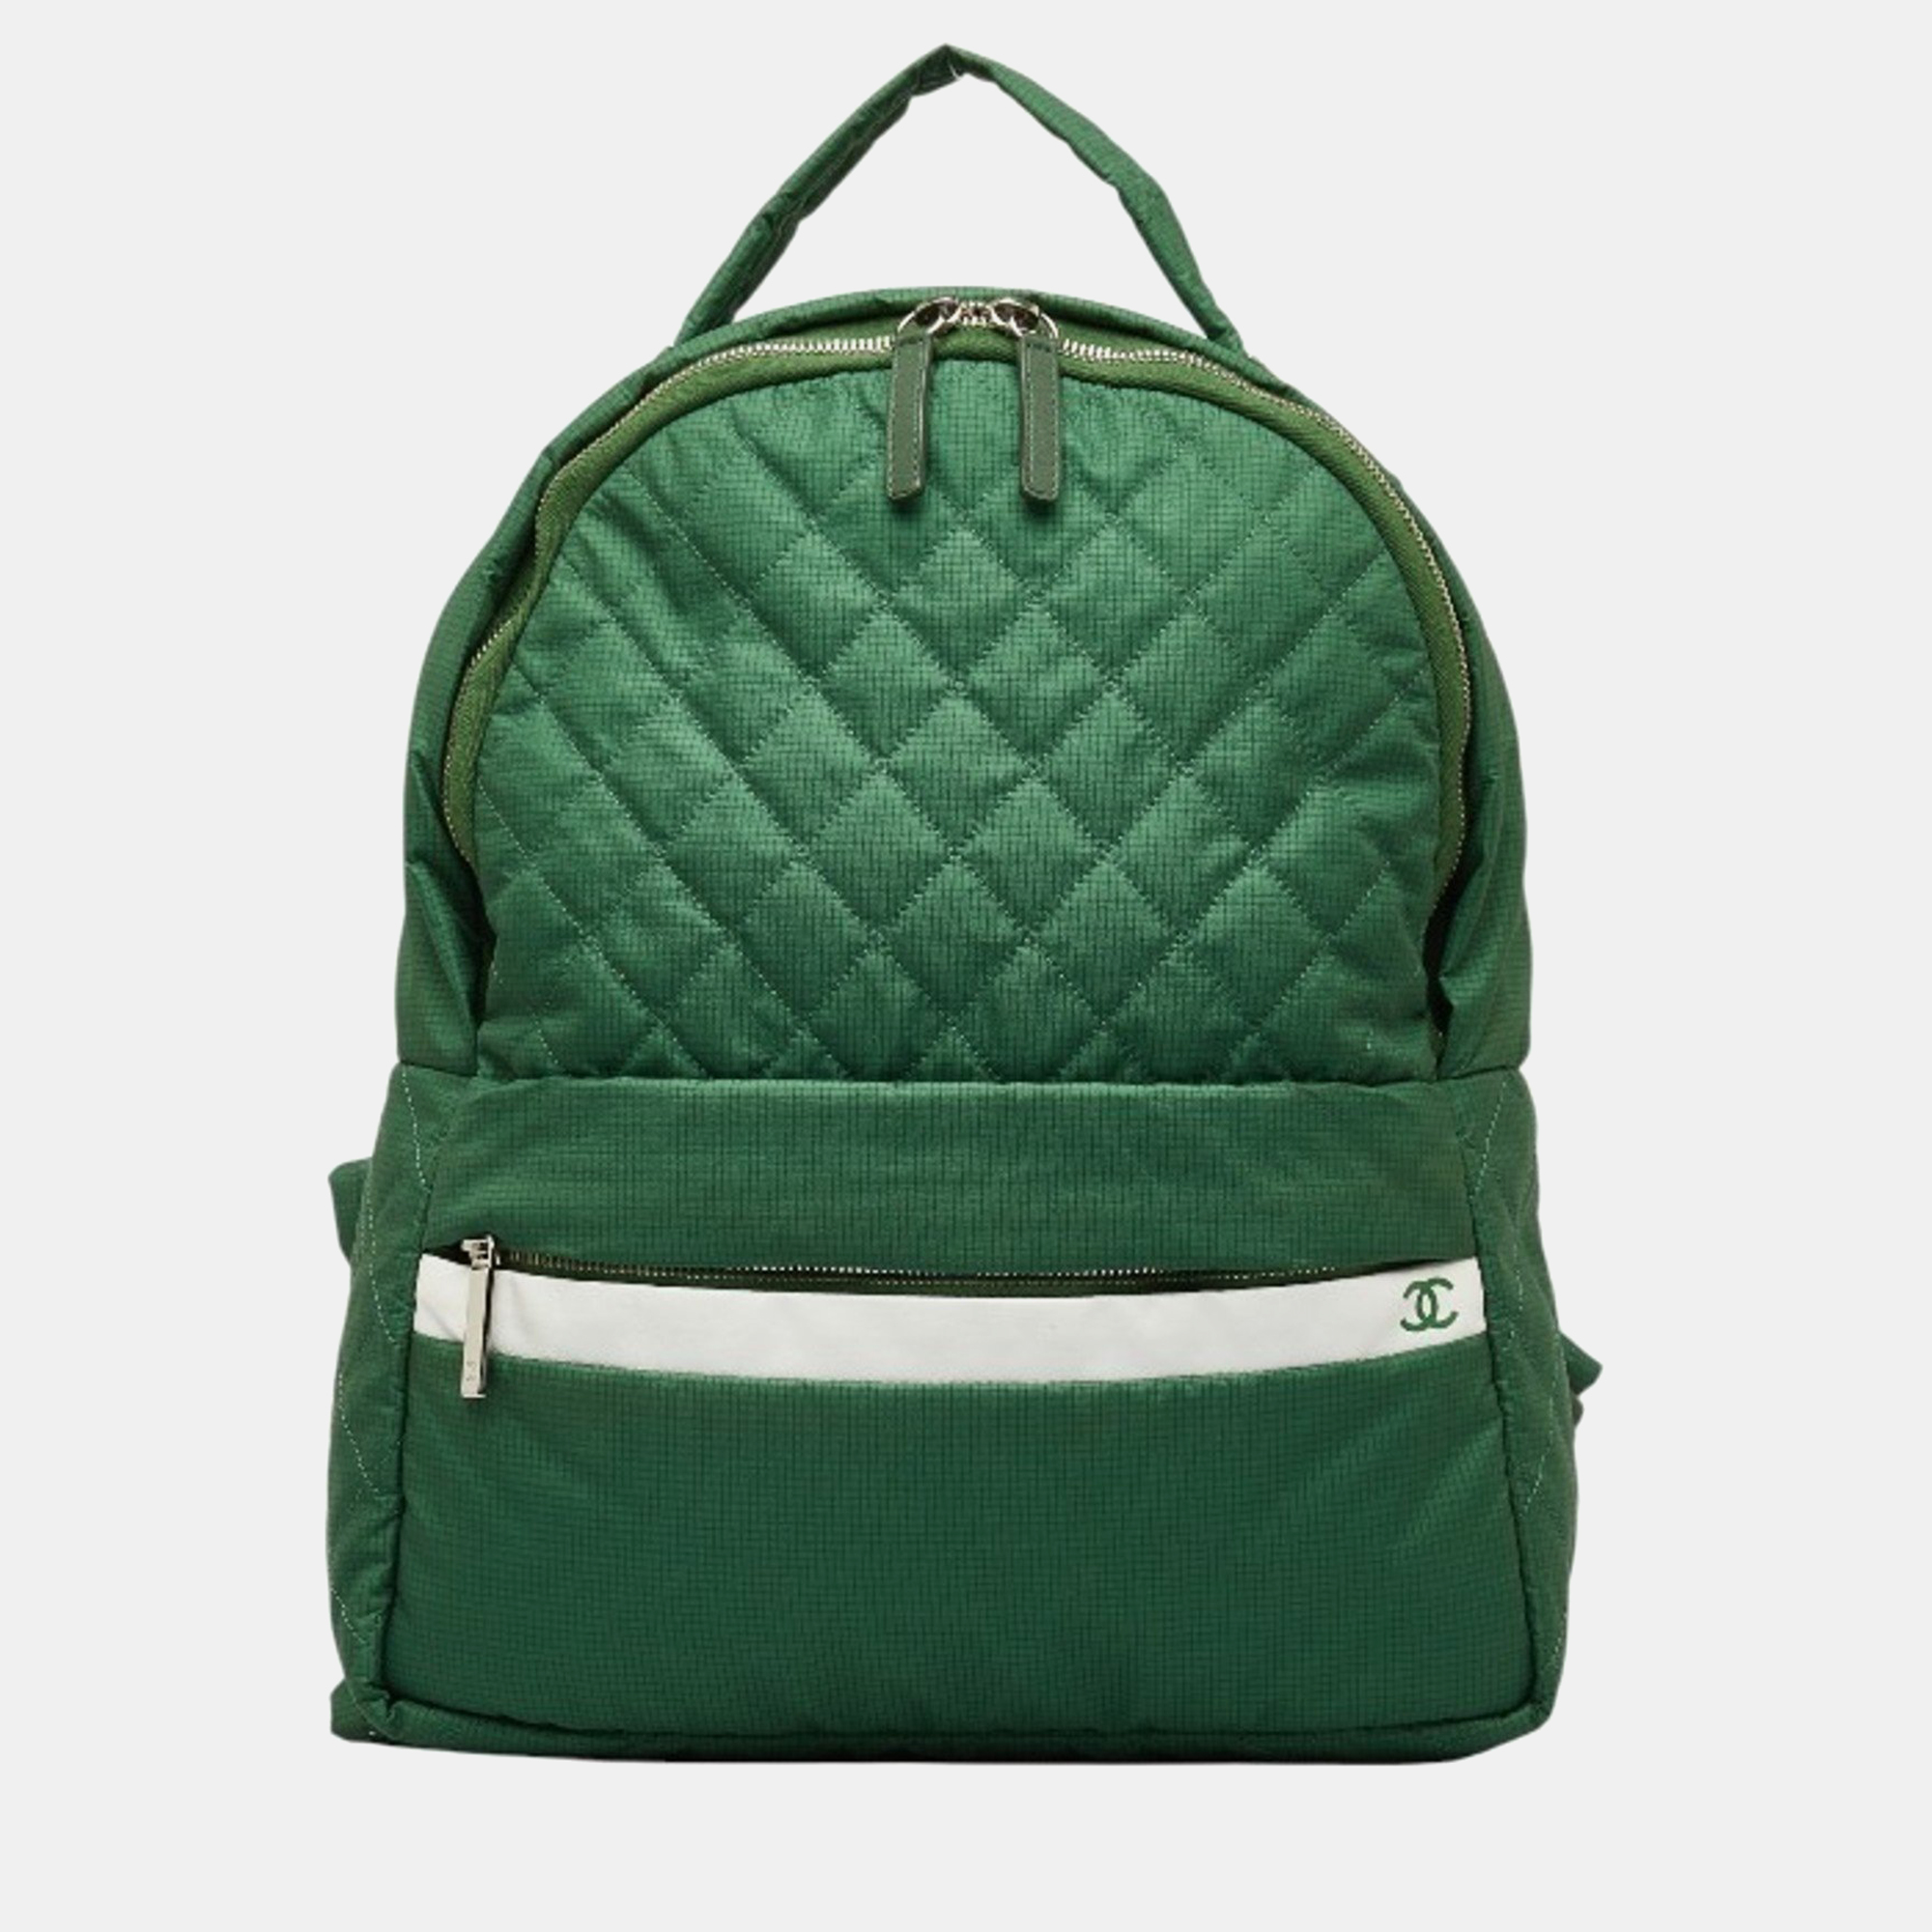 Chanel green nylon coco cocoon backpack